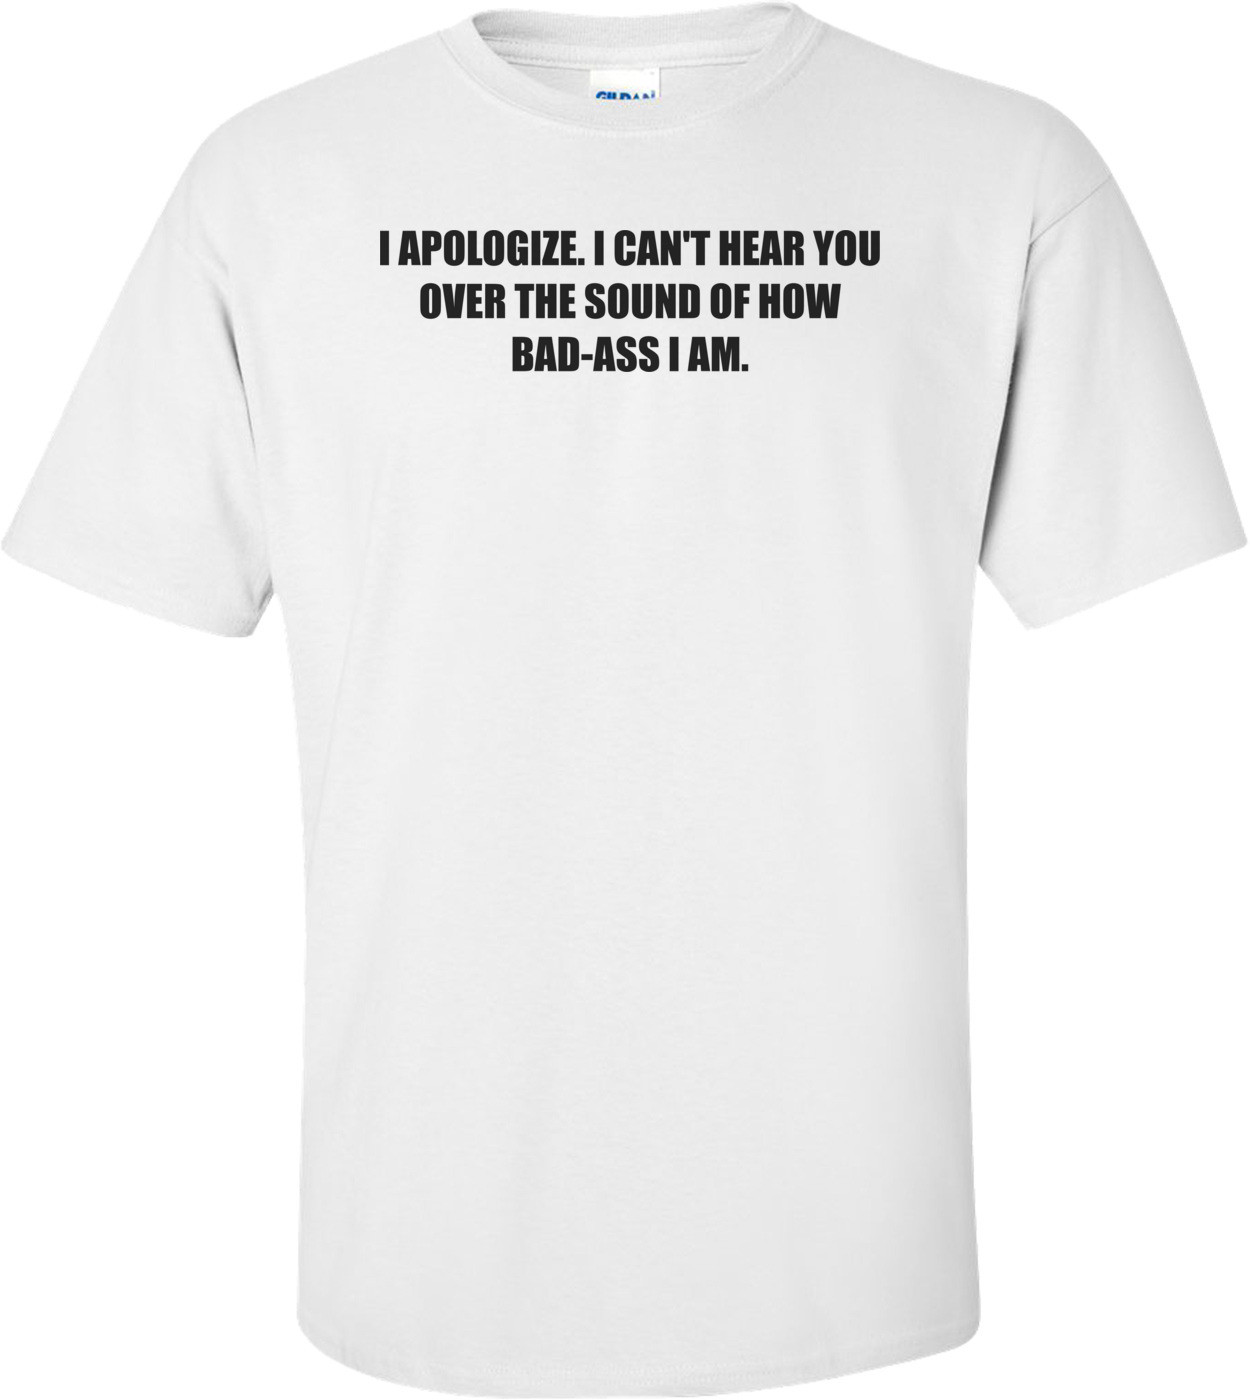 I APOLOGIZE. I CAN'T HEAR YOU OVER THE SOUND OF HOW BAD-ASS I AM. Shirt